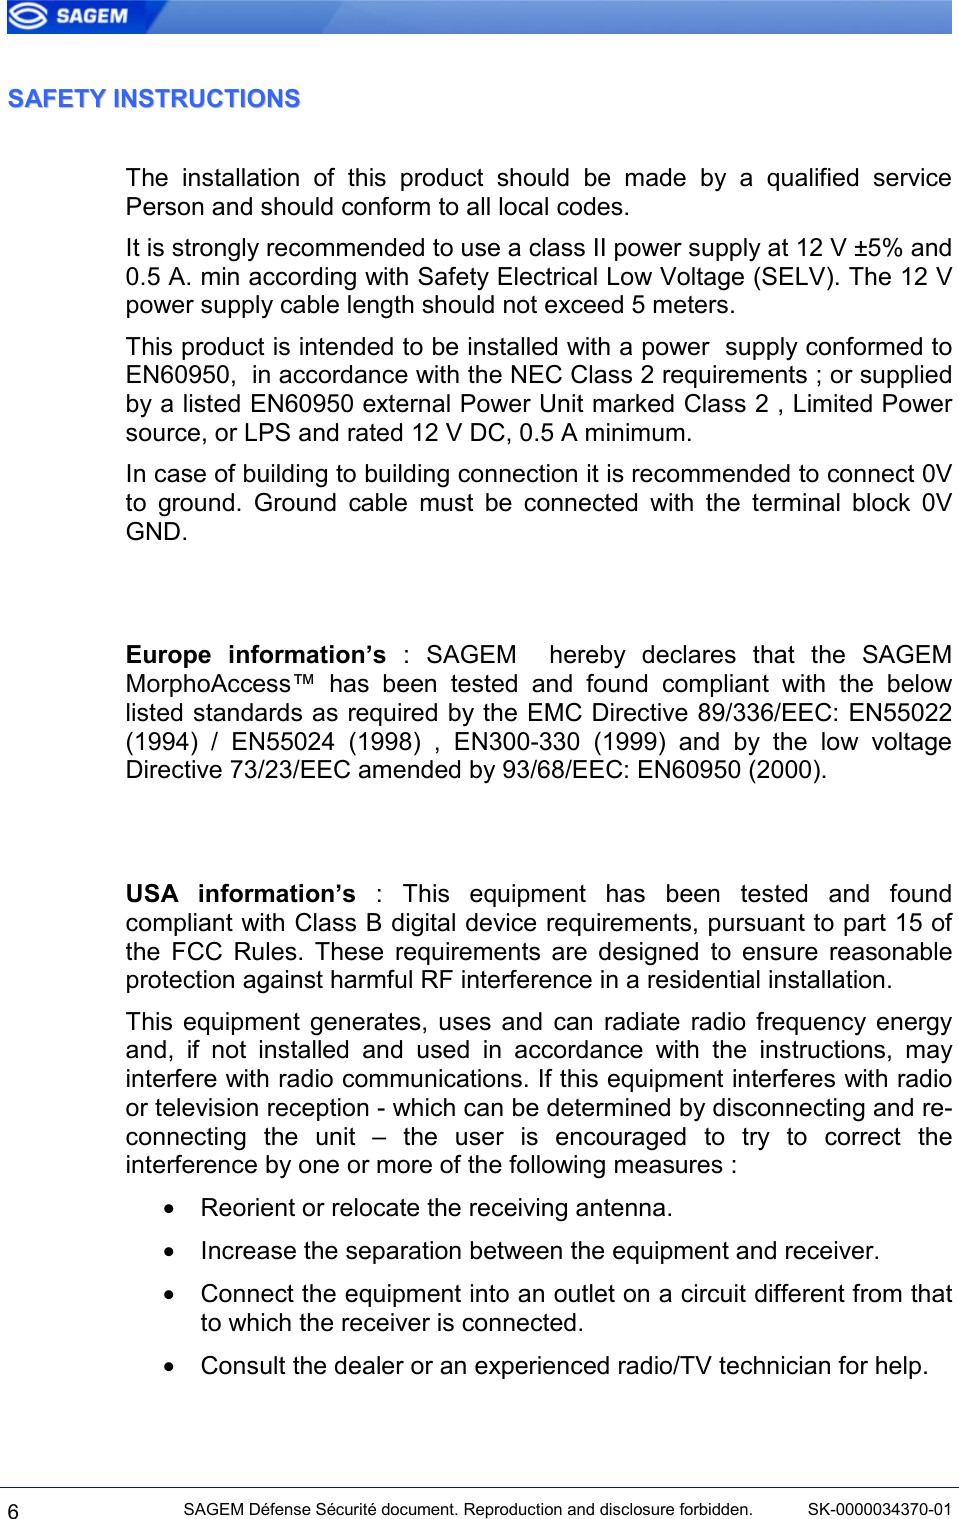  6 SAGEM Défense Sécurité document. Reproduction and disclosure forbidden.  SK-0000034370-01 SSAAFFEETTYY  IINNSSTTRRUUCCTTIIOONNSS  The installation of this product should be made by a qualified service Person and should conform to all local codes. It is strongly recommended to use a class II power supply at 12 V ±5% and 0.5 A. min according with Safety Electrical Low Voltage (SELV). The 12 V power supply cable length should not exceed 5 meters. This product is intended to be installed with a power  supply conformed to EN60950,  in accordance with the NEC Class 2 requirements ; or supplied by a listed EN60950 external Power Unit marked Class 2 , Limited Power source, or LPS and rated 12 V DC, 0.5 A minimum. In case of building to building connection it is recommended to connect 0V to ground. Ground cable must be connected with the terminal block 0V GND.   Europe information’s : SAGEM  hereby declares that the SAGEM  MorphoAccess™ has been tested and found compliant with the below listed standards as required by the EMC Directive 89/336/EEC: EN55022 (1994) / EN55024 (1998) , EN300-330 (1999) and by the low voltage Directive 73/23/EEC amended by 93/68/EEC: EN60950 (2000).   USA information’s : This equipment has been tested and found compliant with Class B digital device requirements, pursuant to part 15 of the FCC Rules. These requirements are designed to ensure reasonable protection against harmful RF interference in a residential installation. This equipment generates, uses and can radiate radio frequency energy and, if not installed and used in accordance with the instructions, may interfere with radio communications. If this equipment interferes with radio or television reception - which can be determined by disconnecting and re-connecting the unit – the user is encouraged to try to correct the interference by one or more of the following measures : •  Reorient or relocate the receiving antenna. •  Increase the separation between the equipment and receiver. •  Connect the equipment into an outlet on a circuit different from that to which the receiver is connected. •  Consult the dealer or an experienced radio/TV technician for help. 